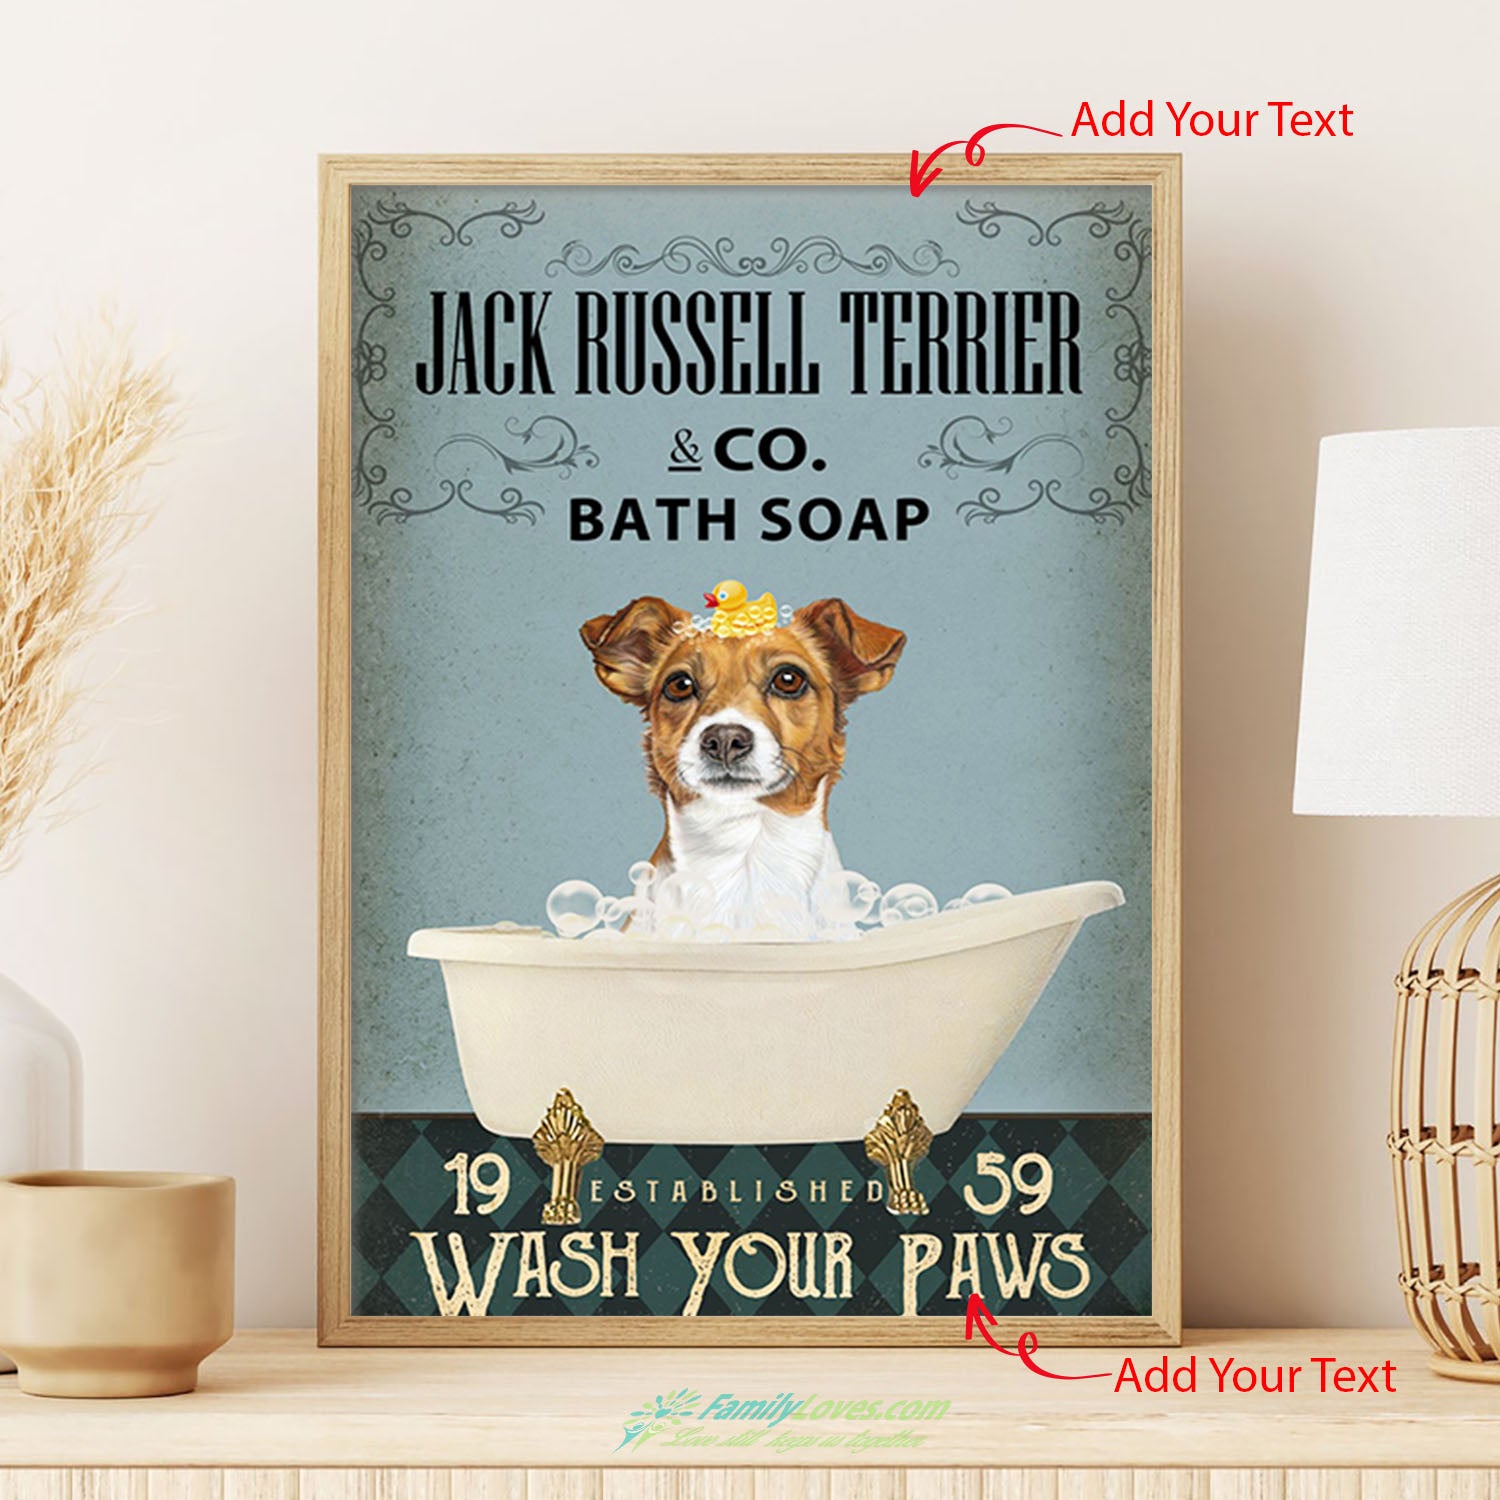 Jack Russell Terrier Co Bath Soap Wash Your Paws Black Canvas For Painting Poster 36X24 All Size 1